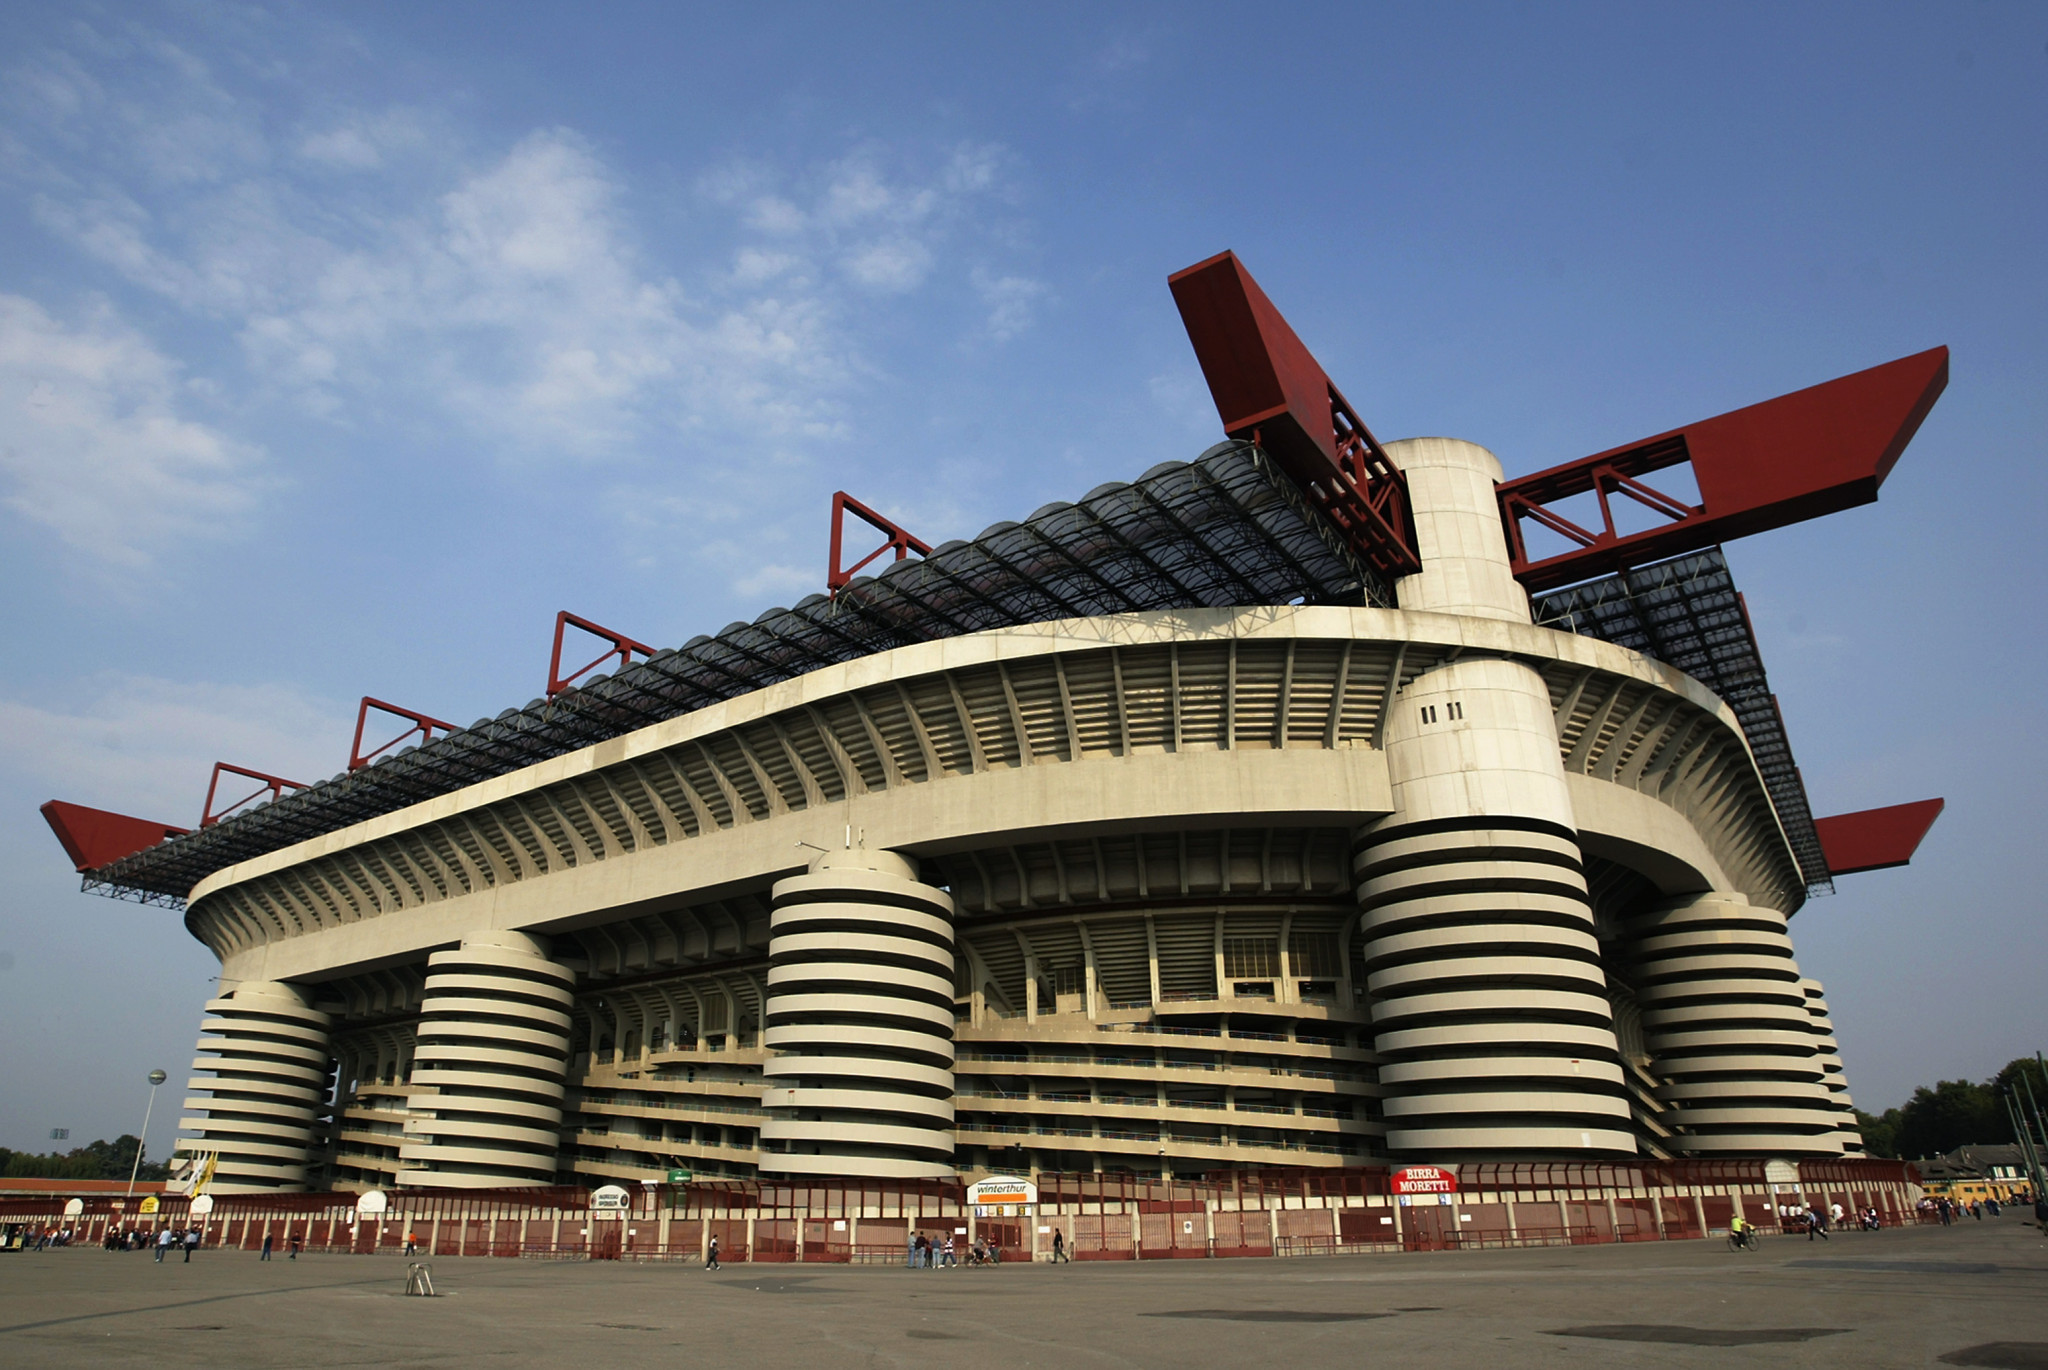 The San Siro in Milan is set to host the Milan Cortina 2026 Opening Ceremony on February 6 2026 ©Getty Images